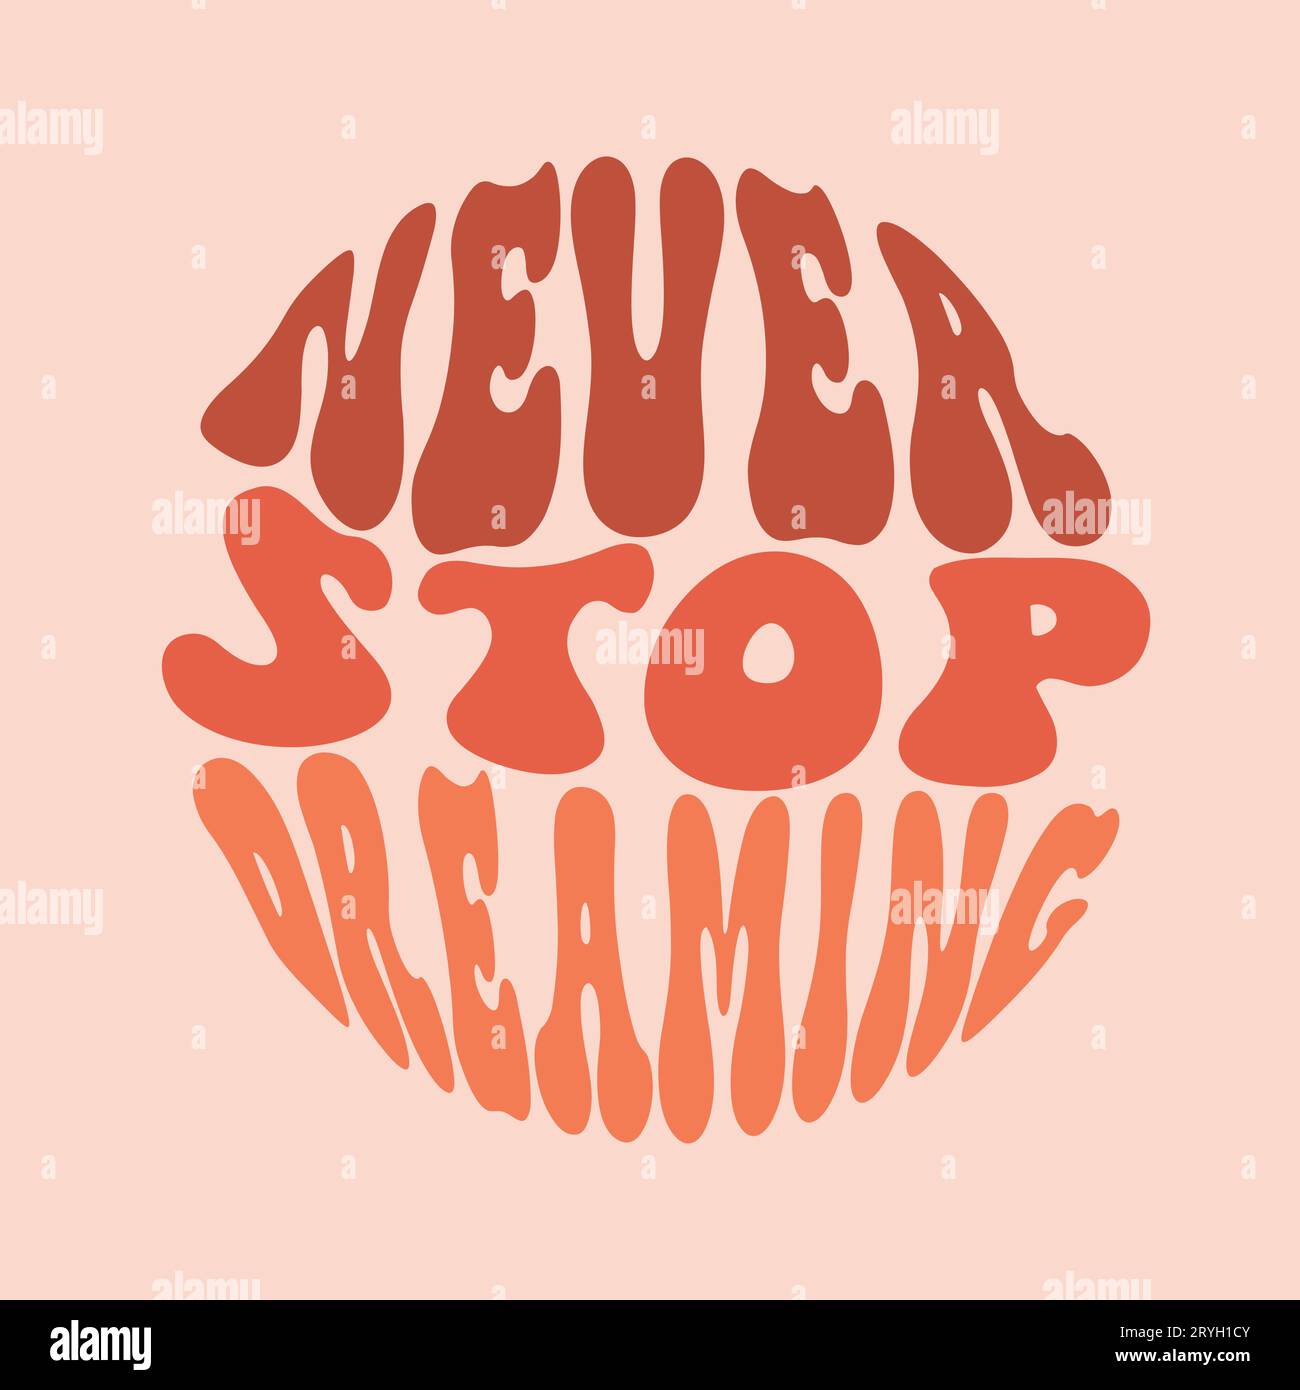 Never stop dreaming Slogan Print 70's Groovy Themed Hand Drawn Abstract Graphic Tee Vector Sticker Stock Vector